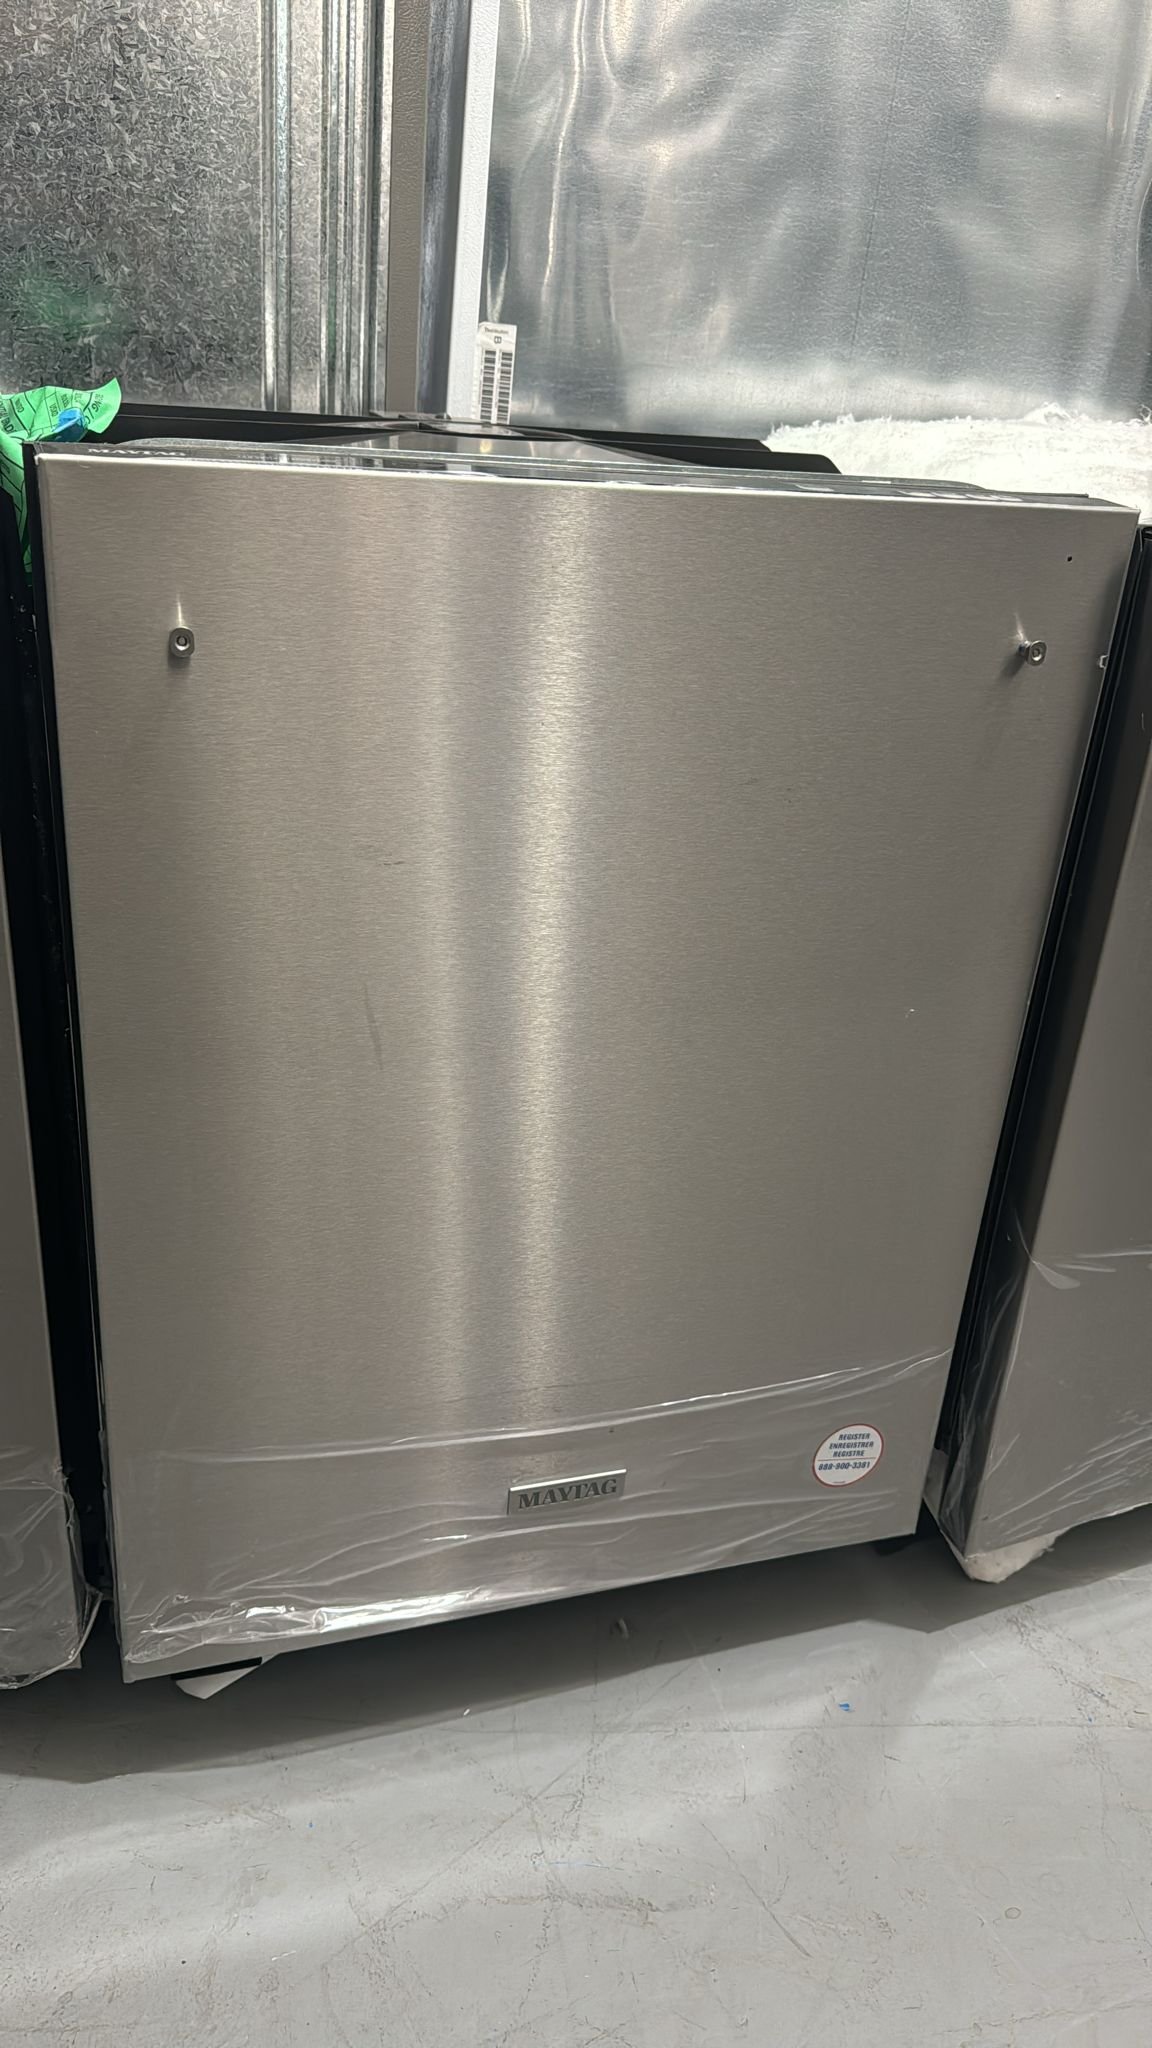 Maytag Scratch and Dent Model Dishwasher – Stainless